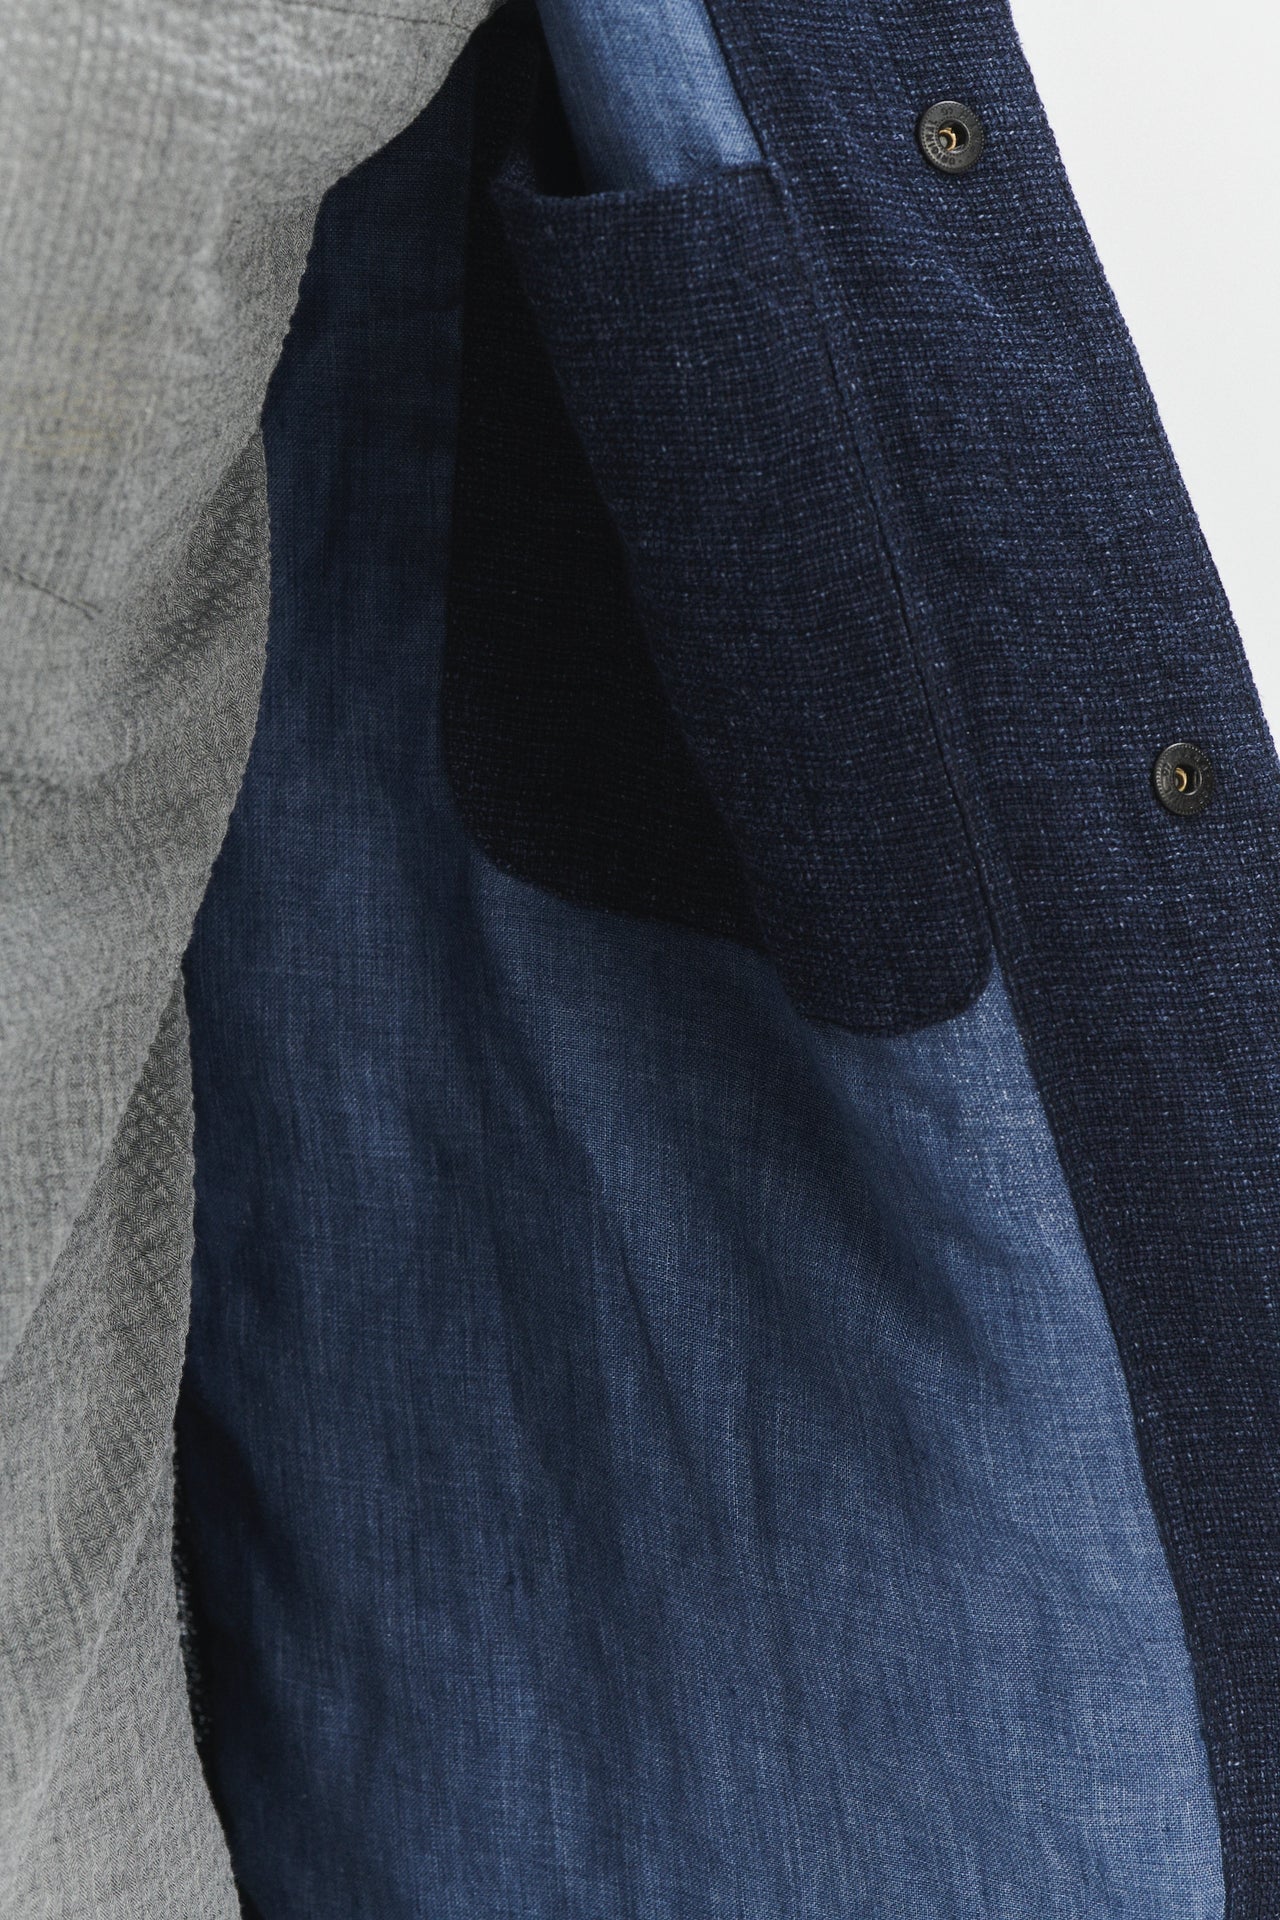 Round Collar Jacket in a Navy Fluid and Structured Italian Linen Crepe